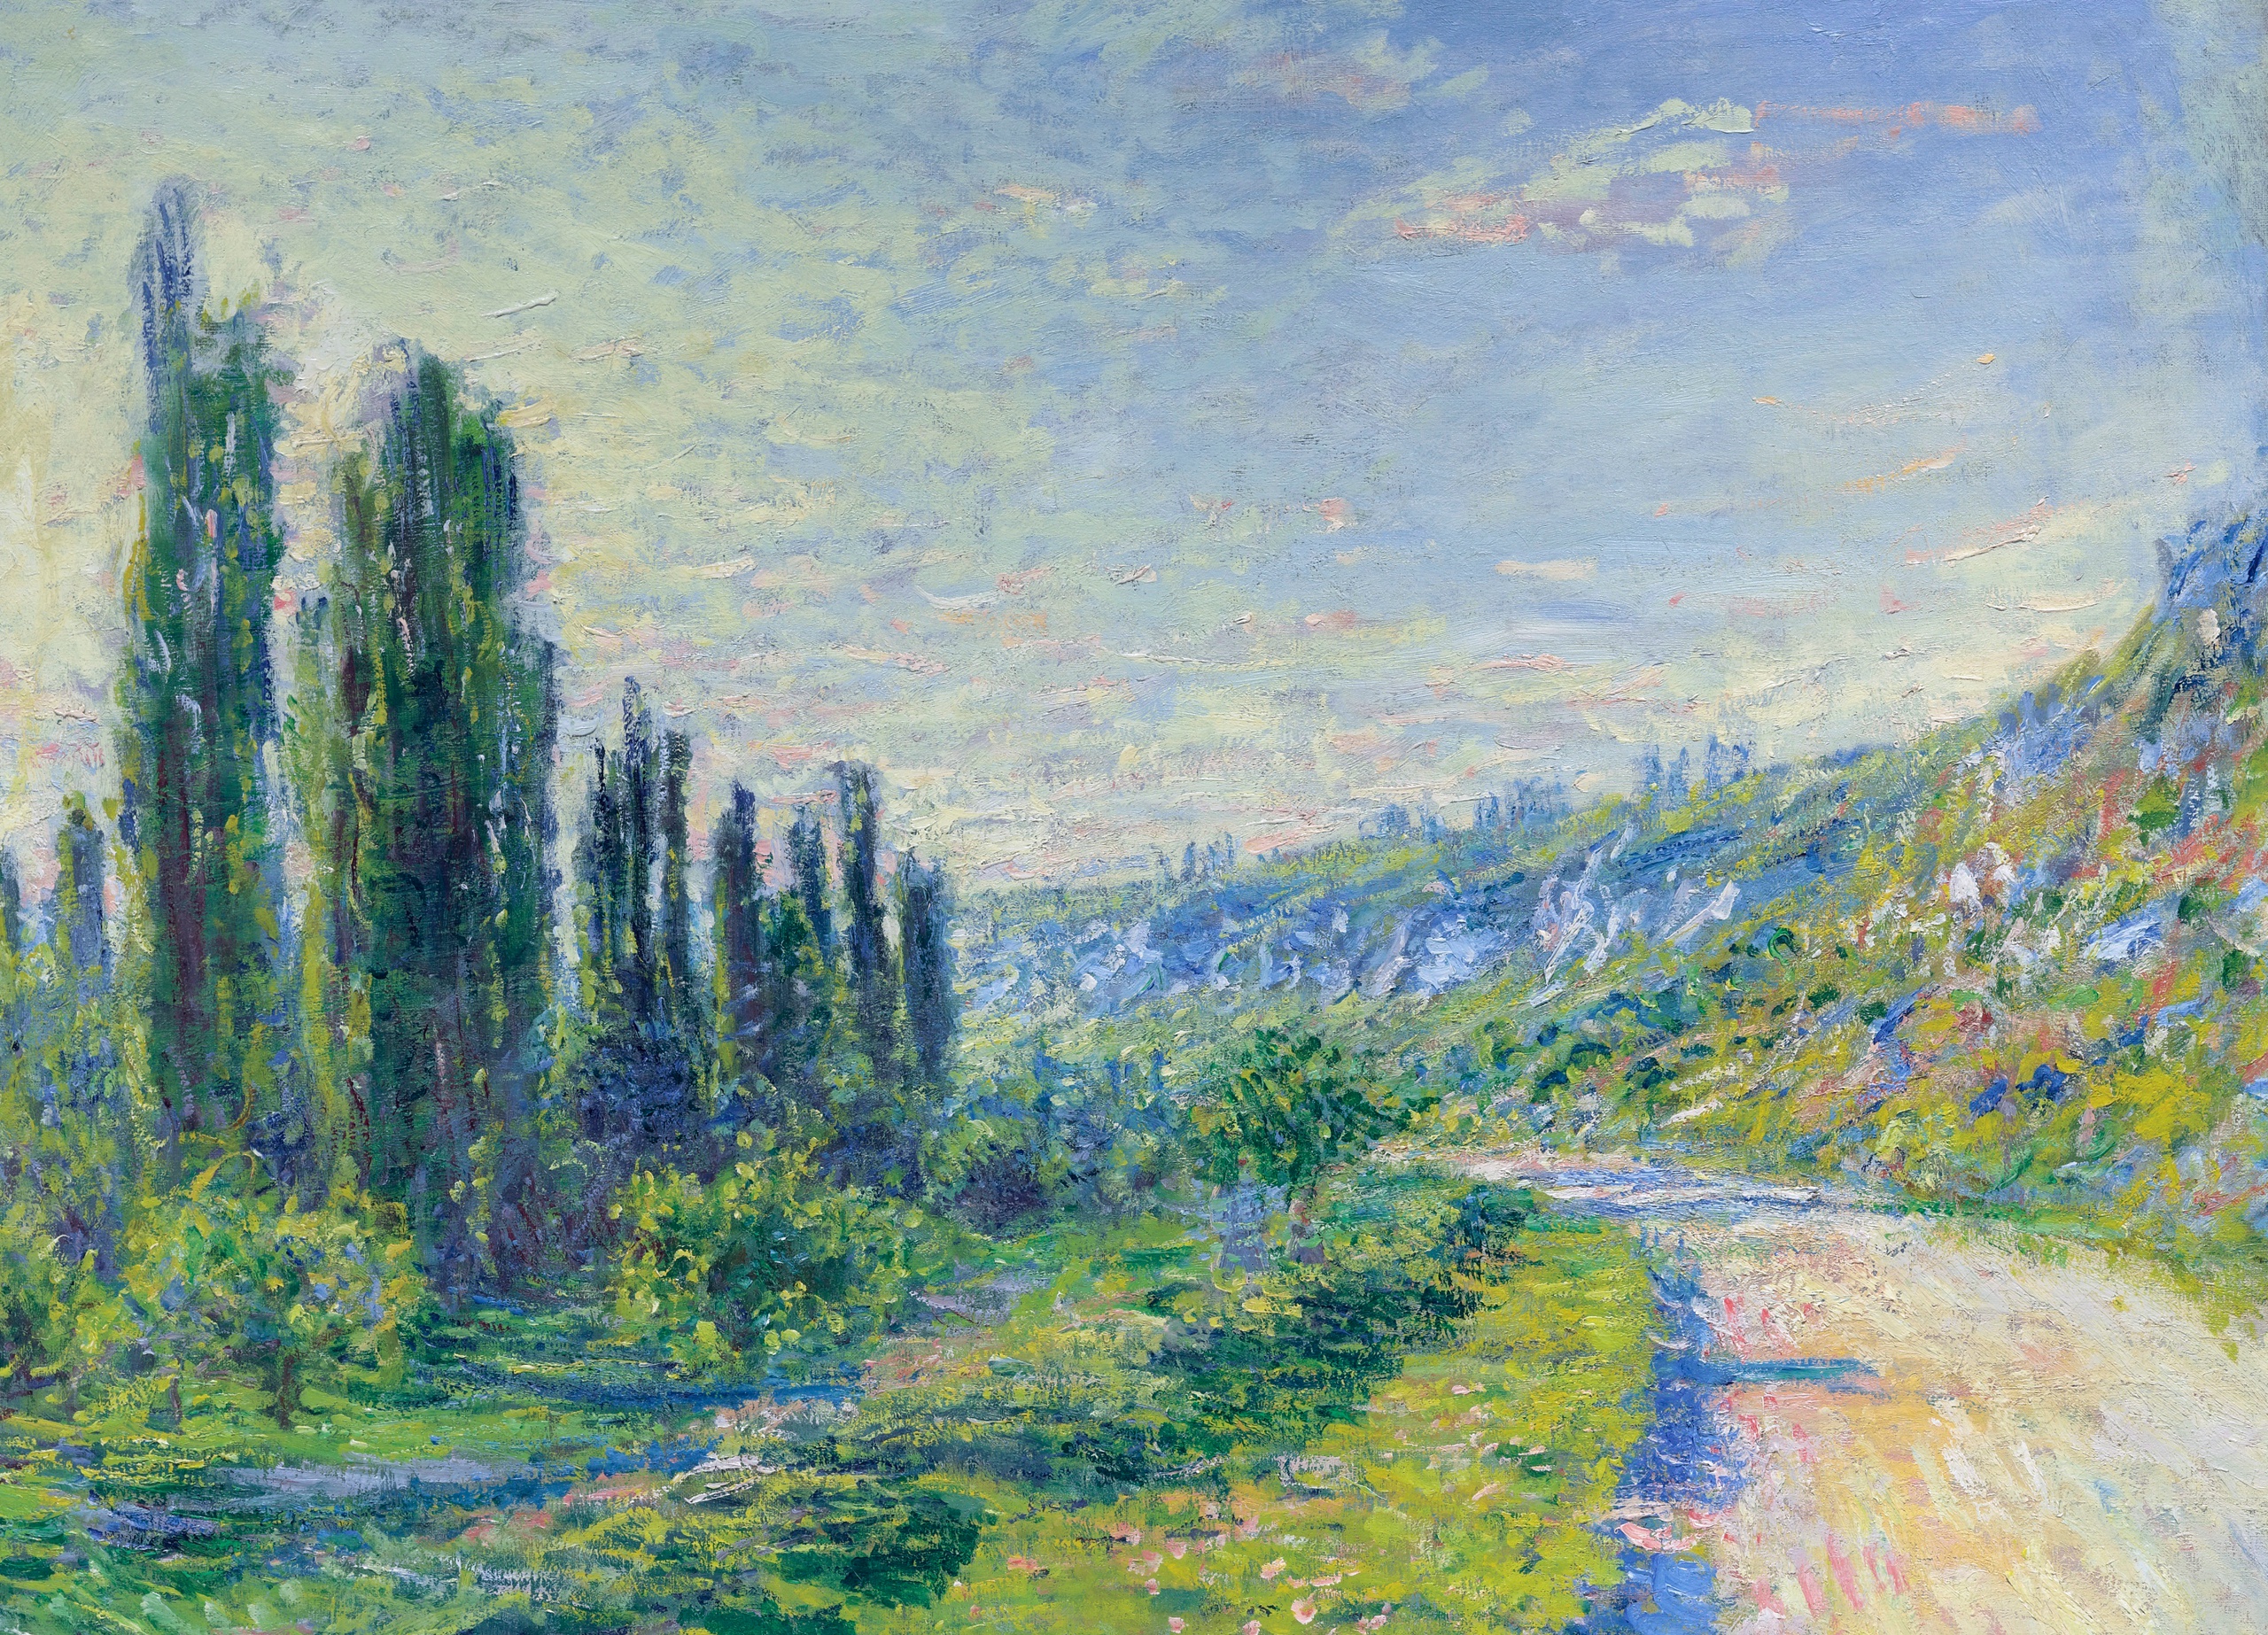 Artistic Painting HD Wallpaper by Claude Monet